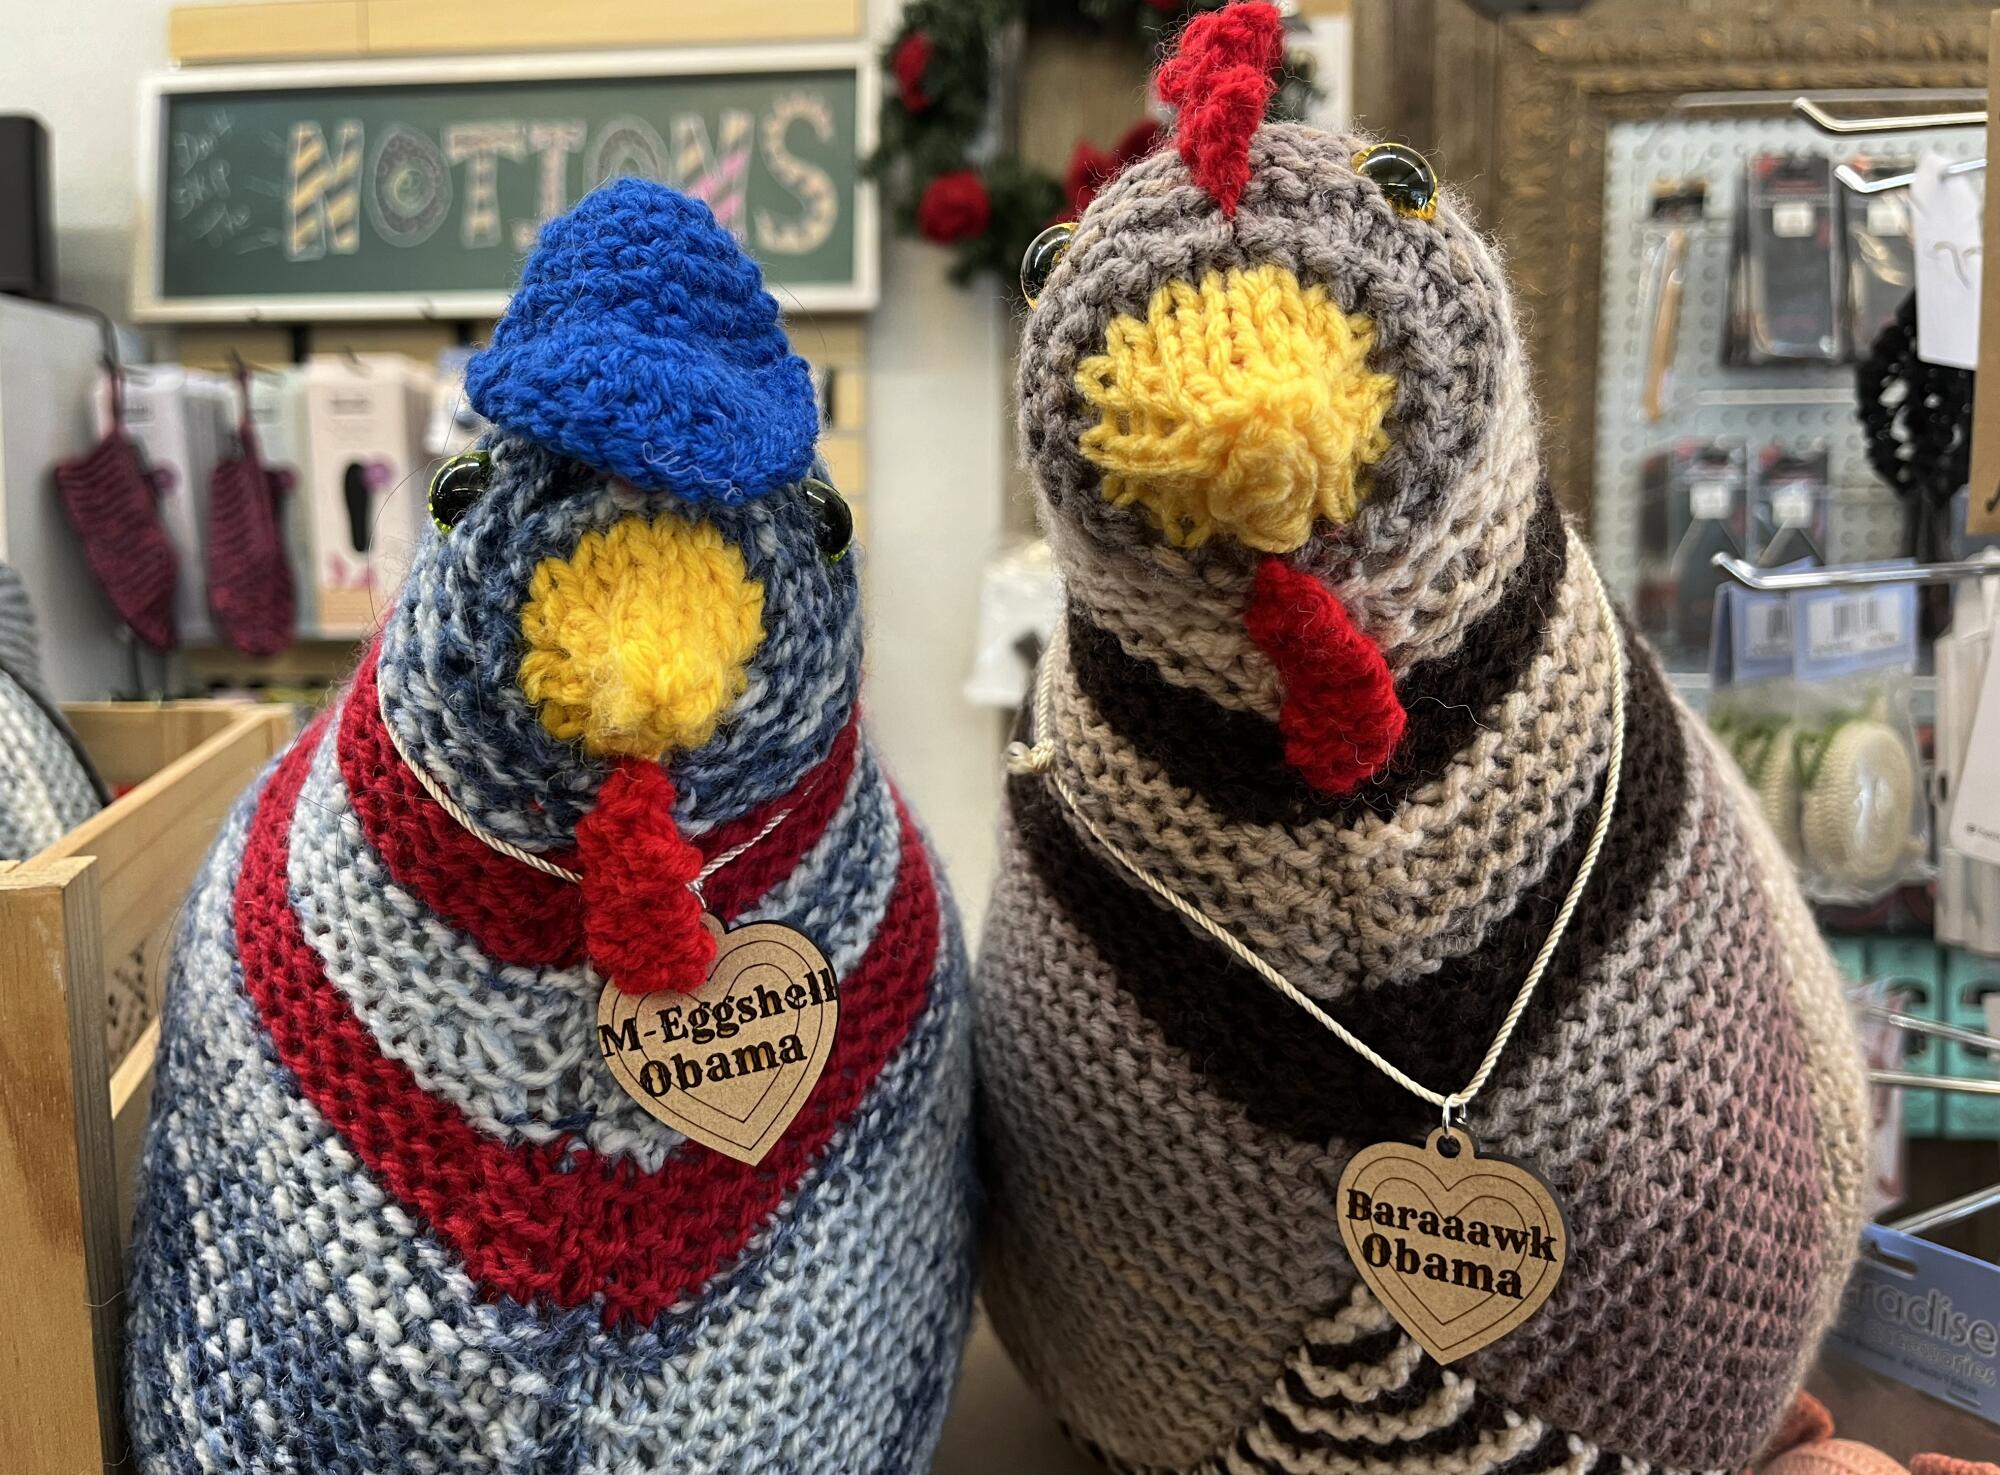 Two knitted and stuffed chickens with name tags: M-eggshell Obama and Baraaawk Obama